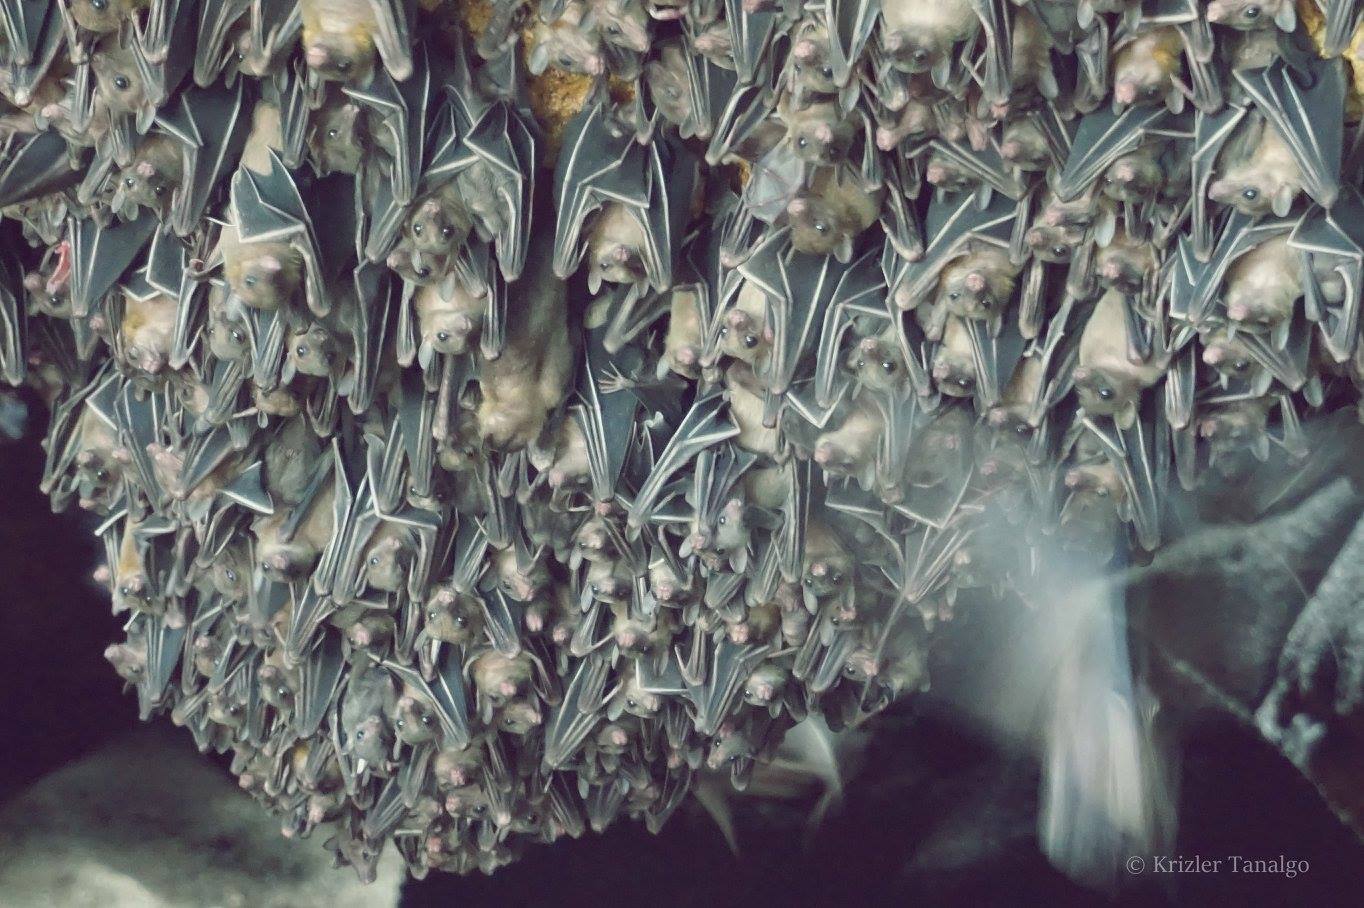 Dozens if not hundreds of bats cluster as they hang upside-down inside a cave.